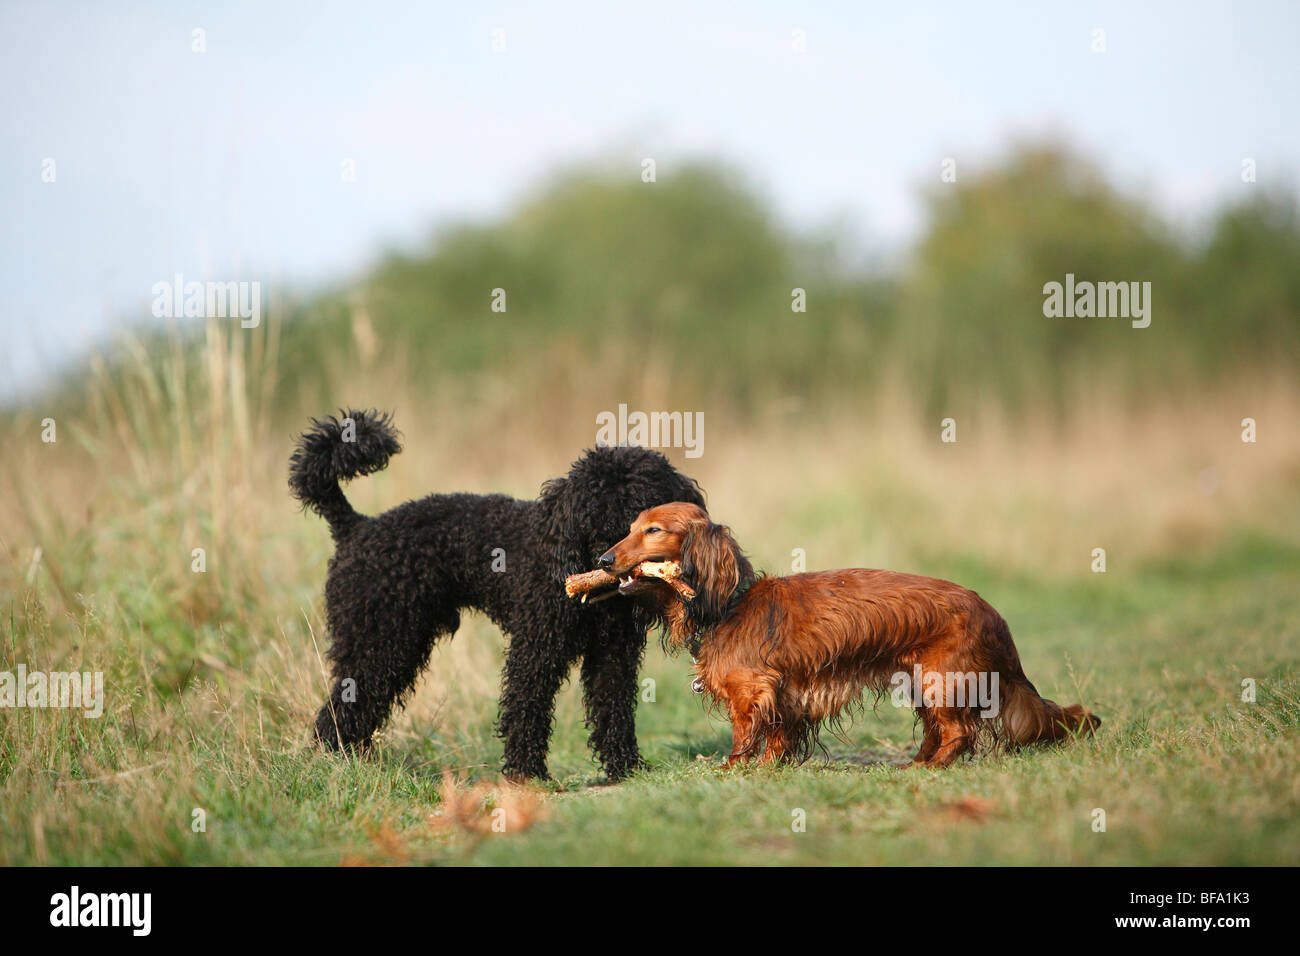 Miniature Poodle (Canis lupus f. familiaris), black mal dog trying to get a stick of a Wire-haired sausage dog Stock Photo